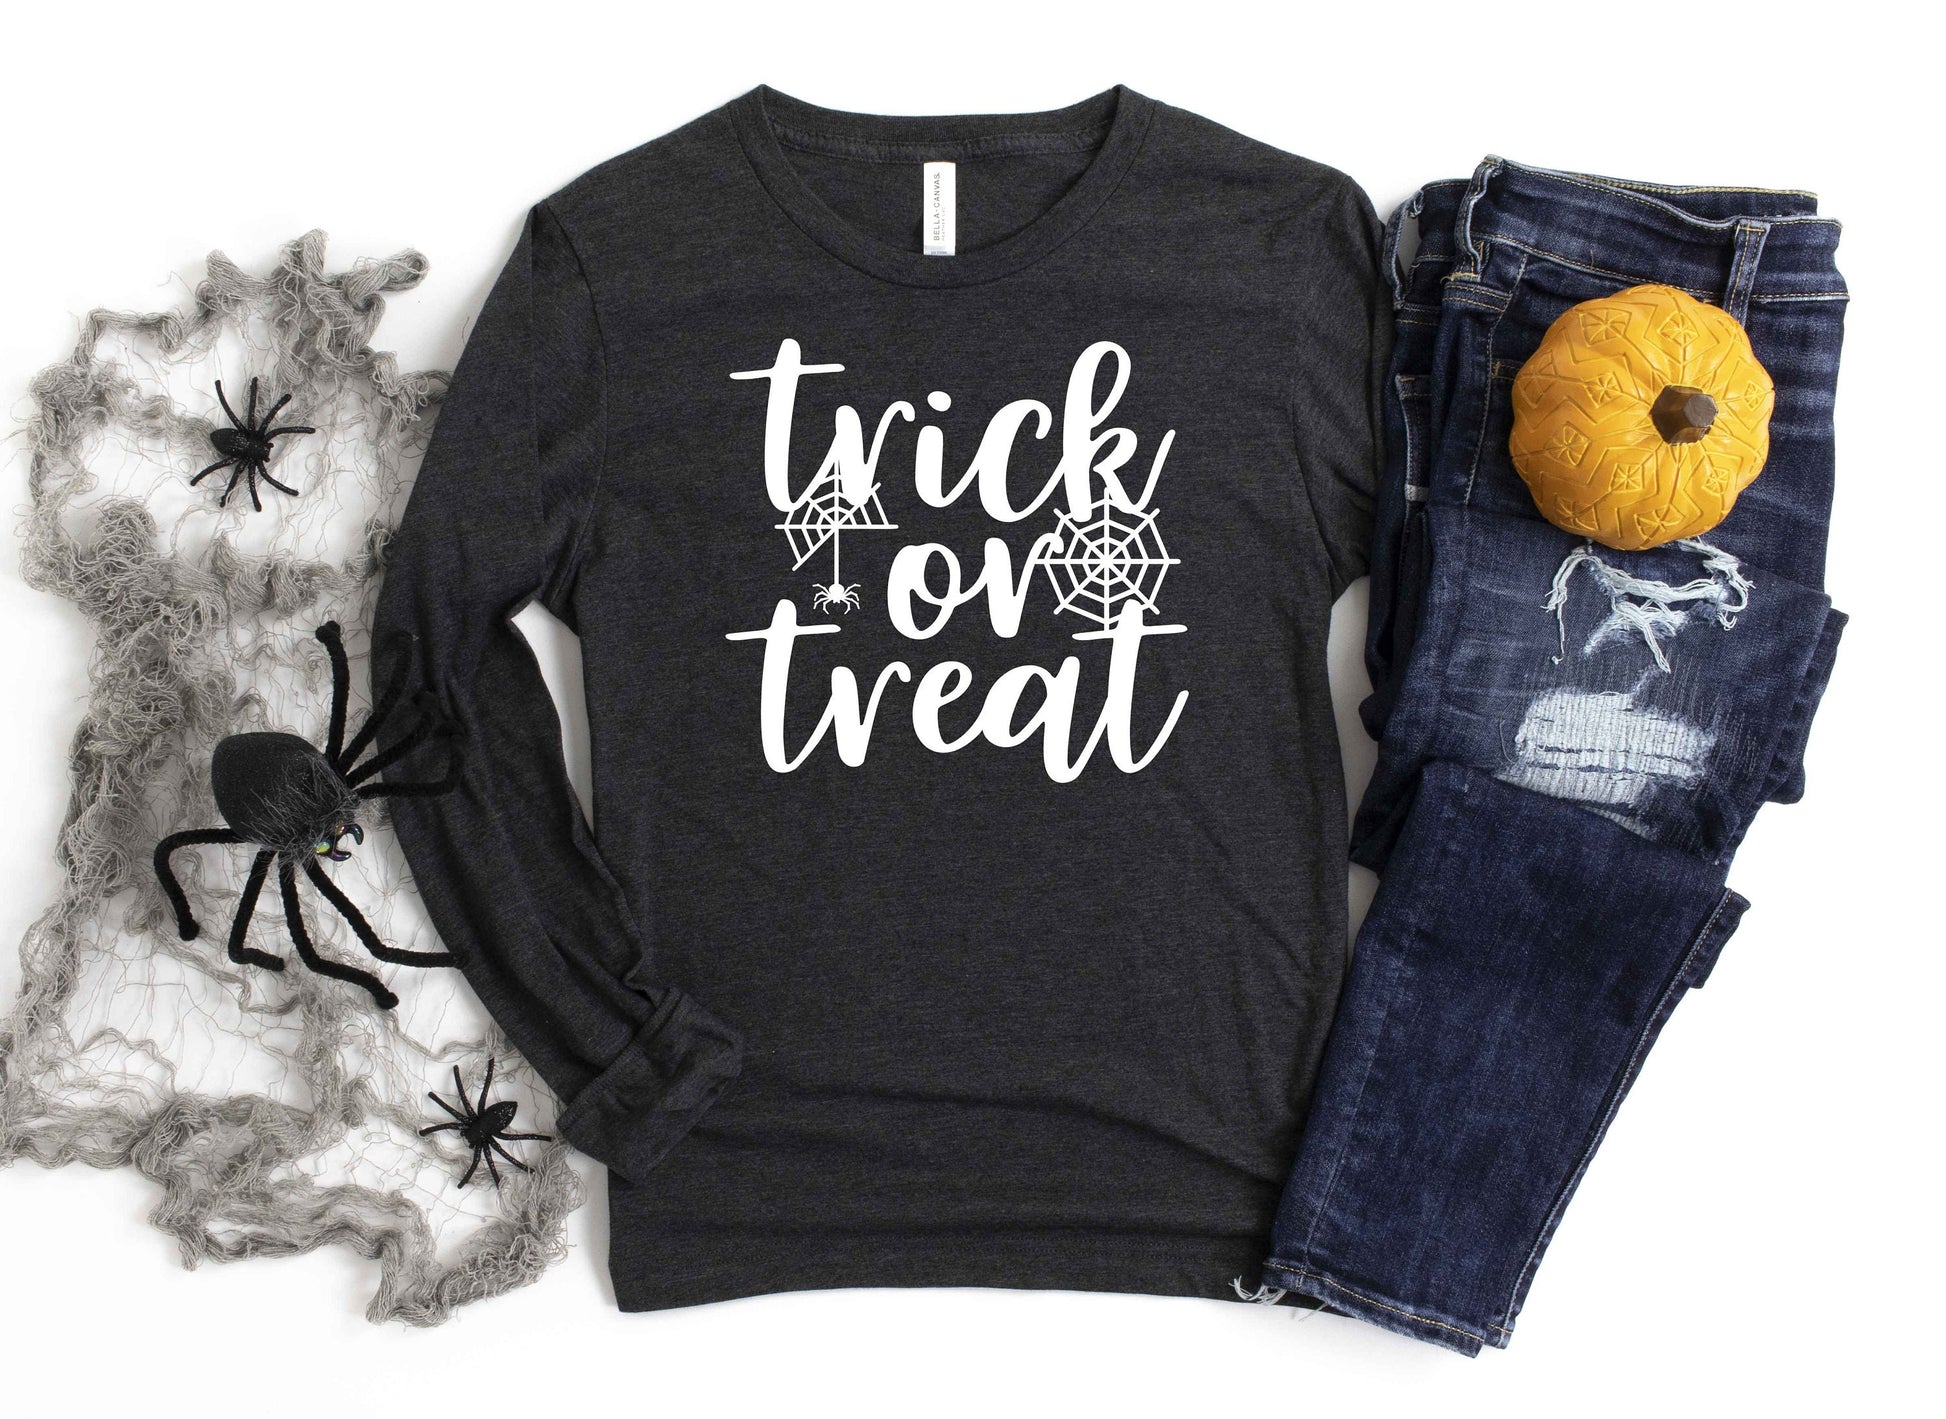 Trick or Treat v4 long sleeve t-shirt, trick or treating shirt, halloween party shirt